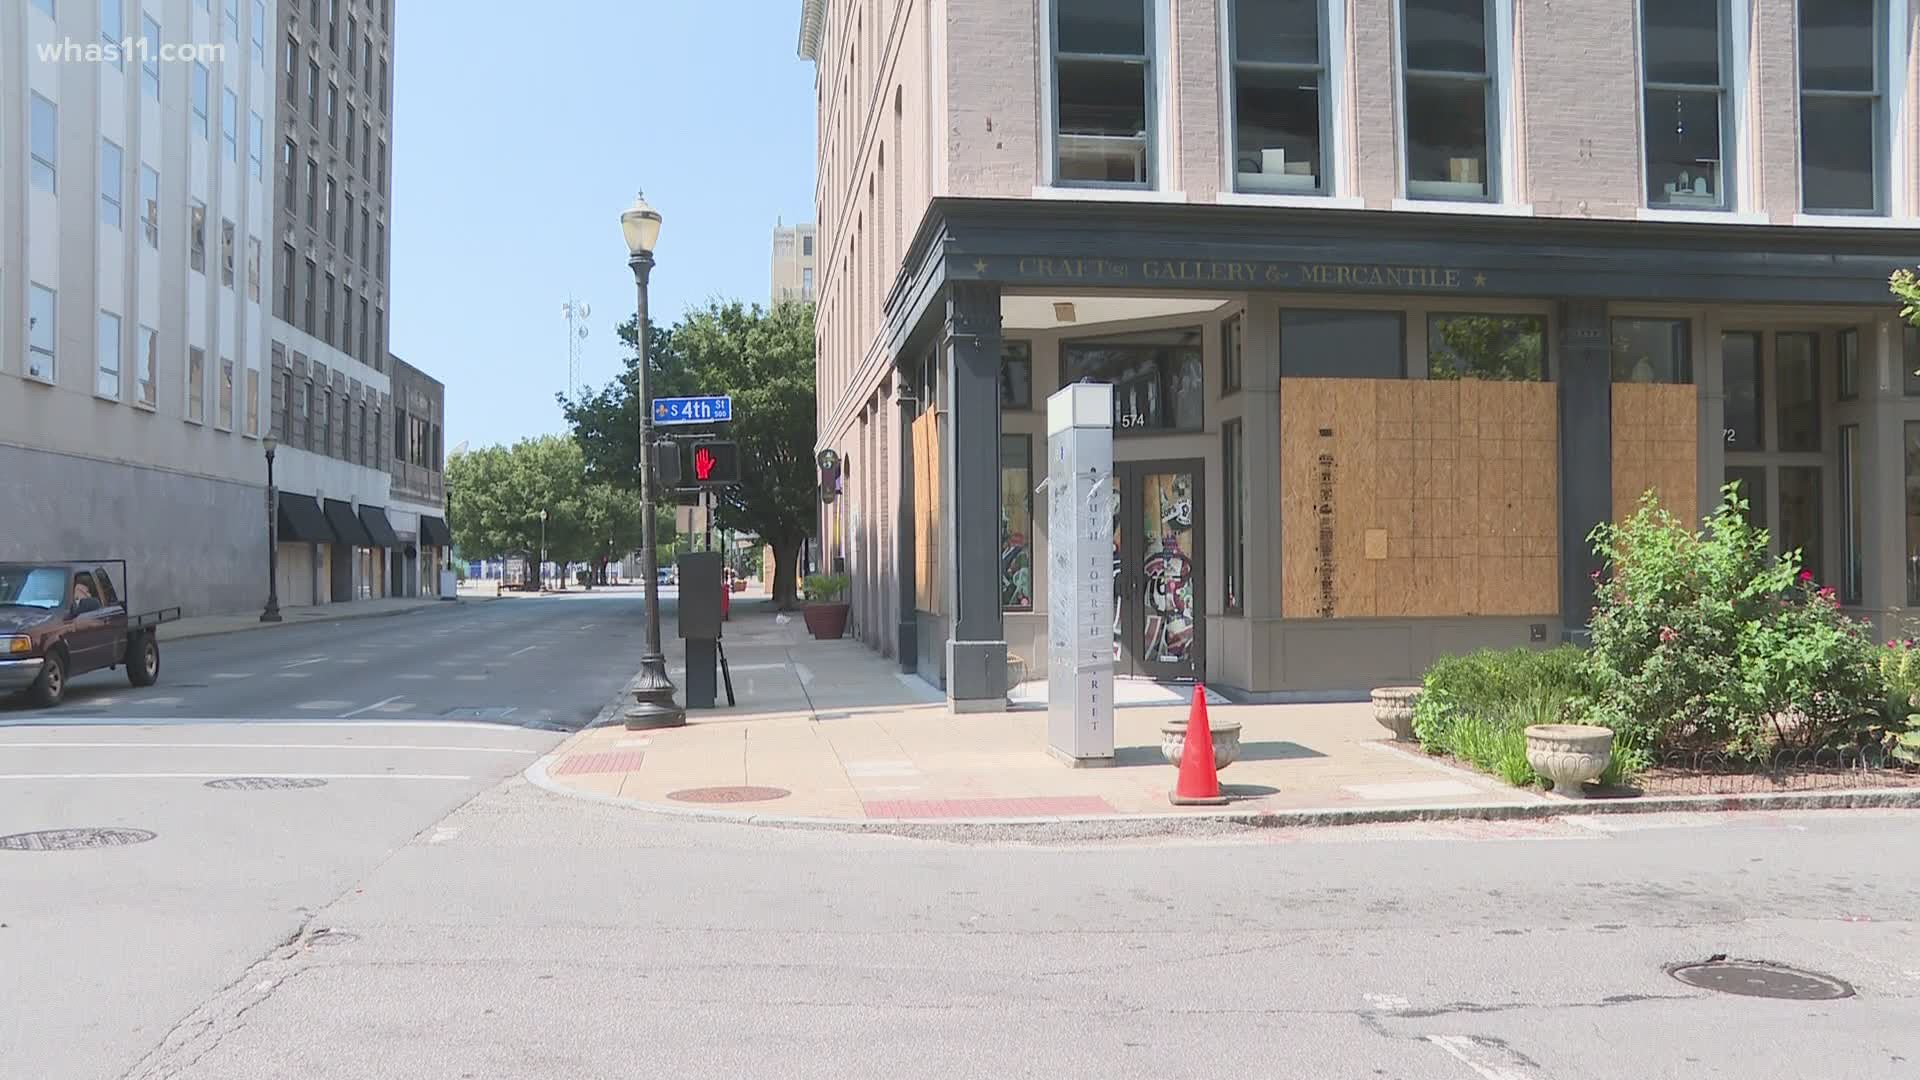 Owner of Riot Cafe inspired by recent protests in Louisville | whas11.com